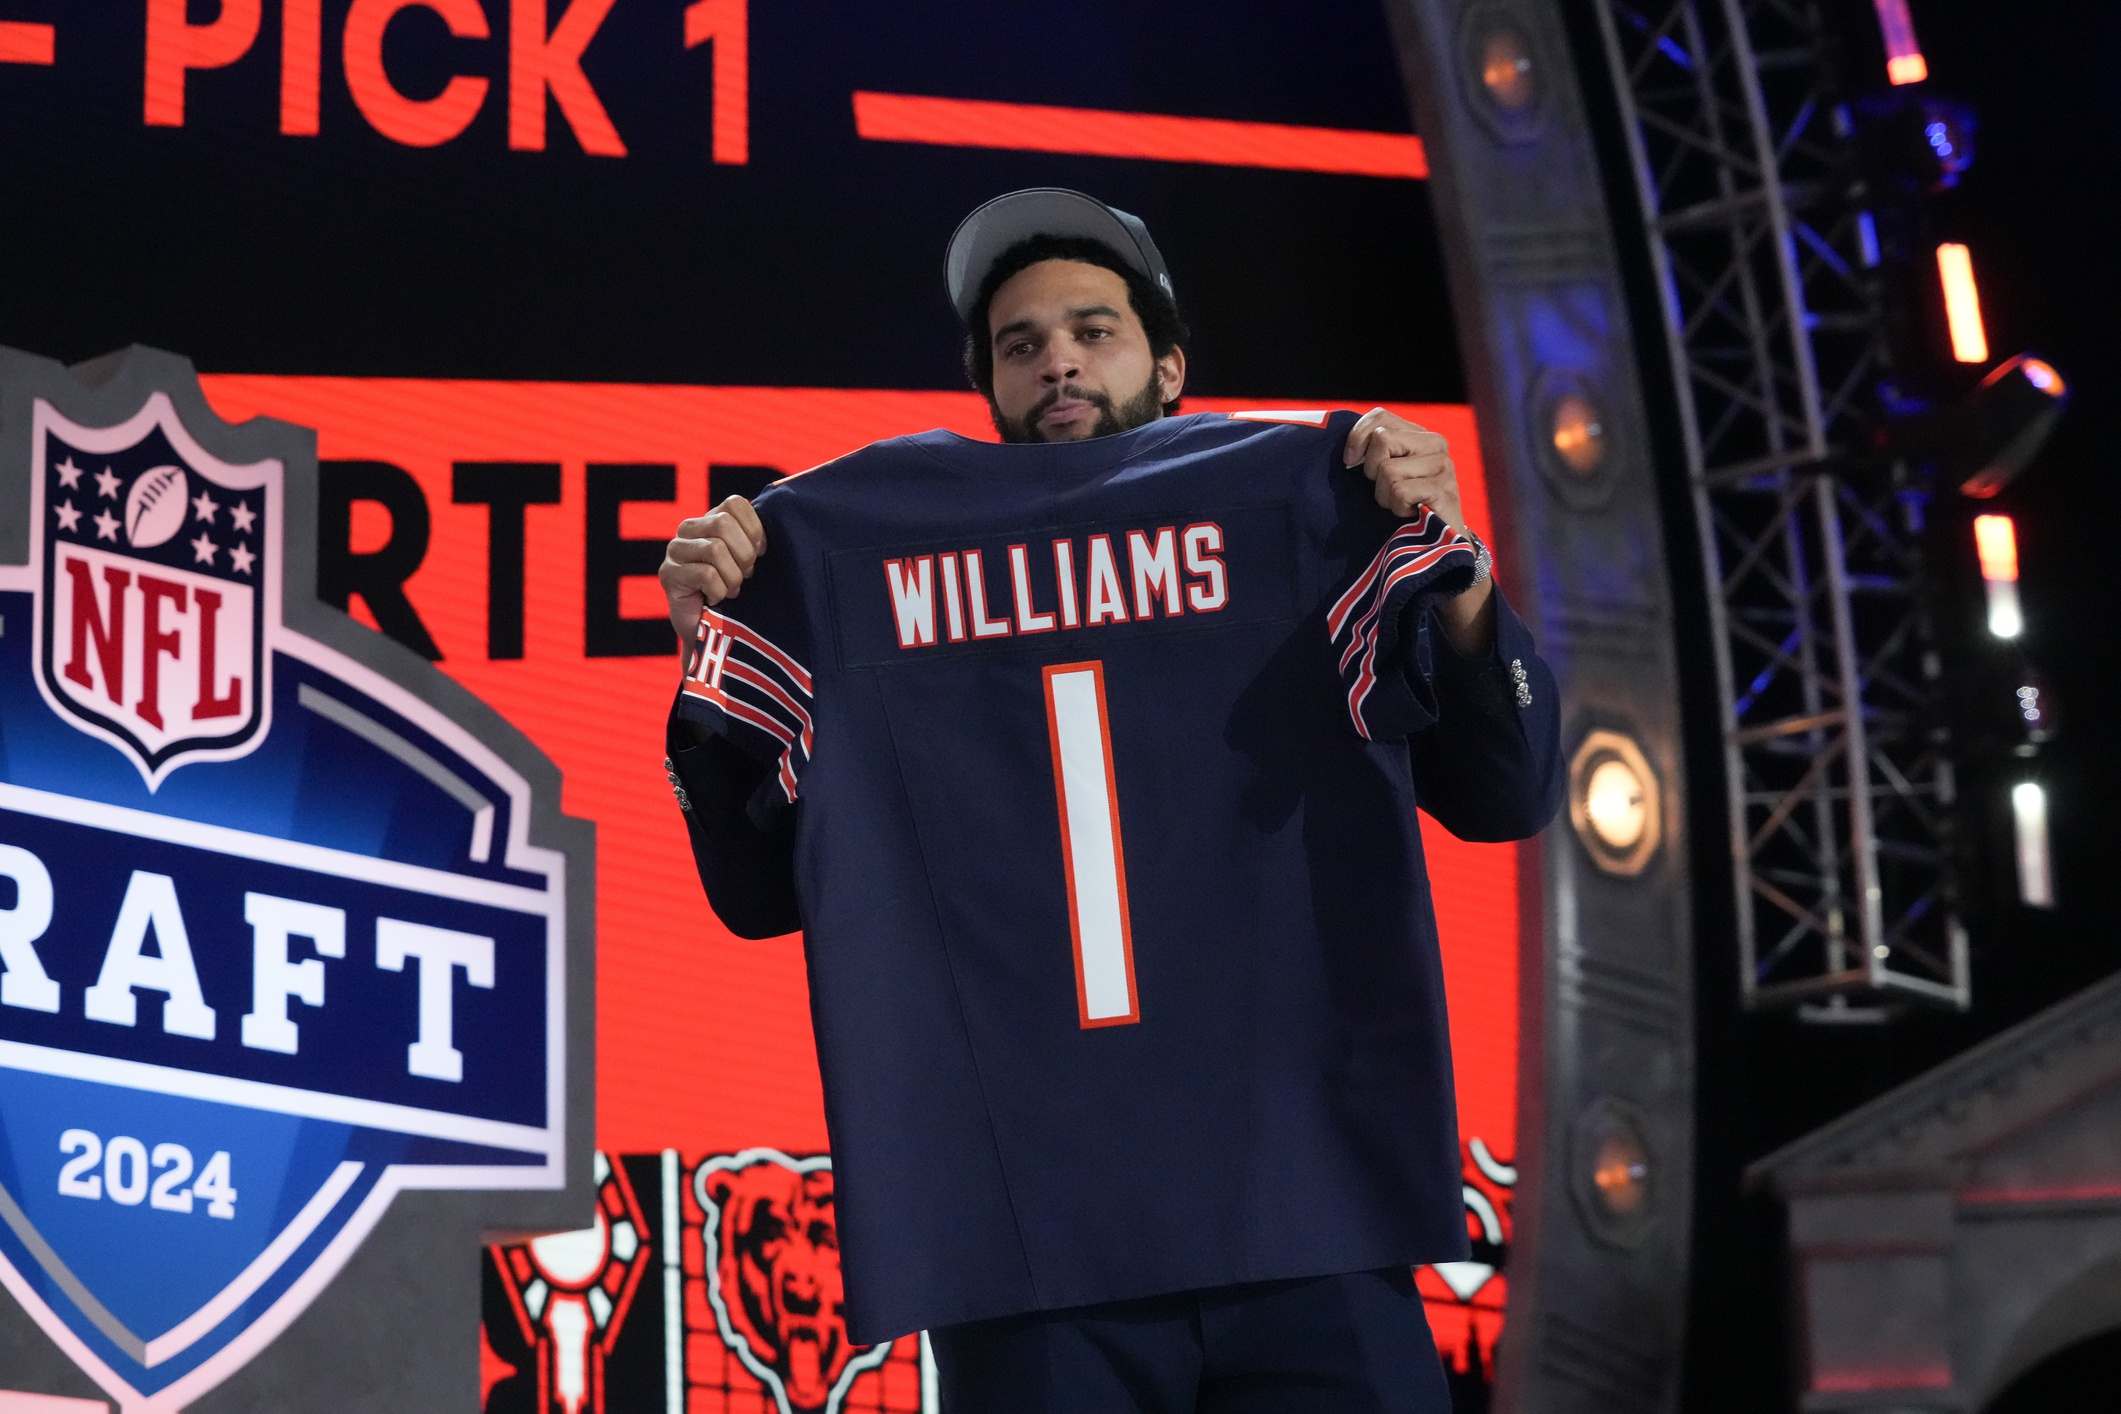 NFL Draft Round 1: The Chicago Bears Select Caleb Williams and Rome Odunze